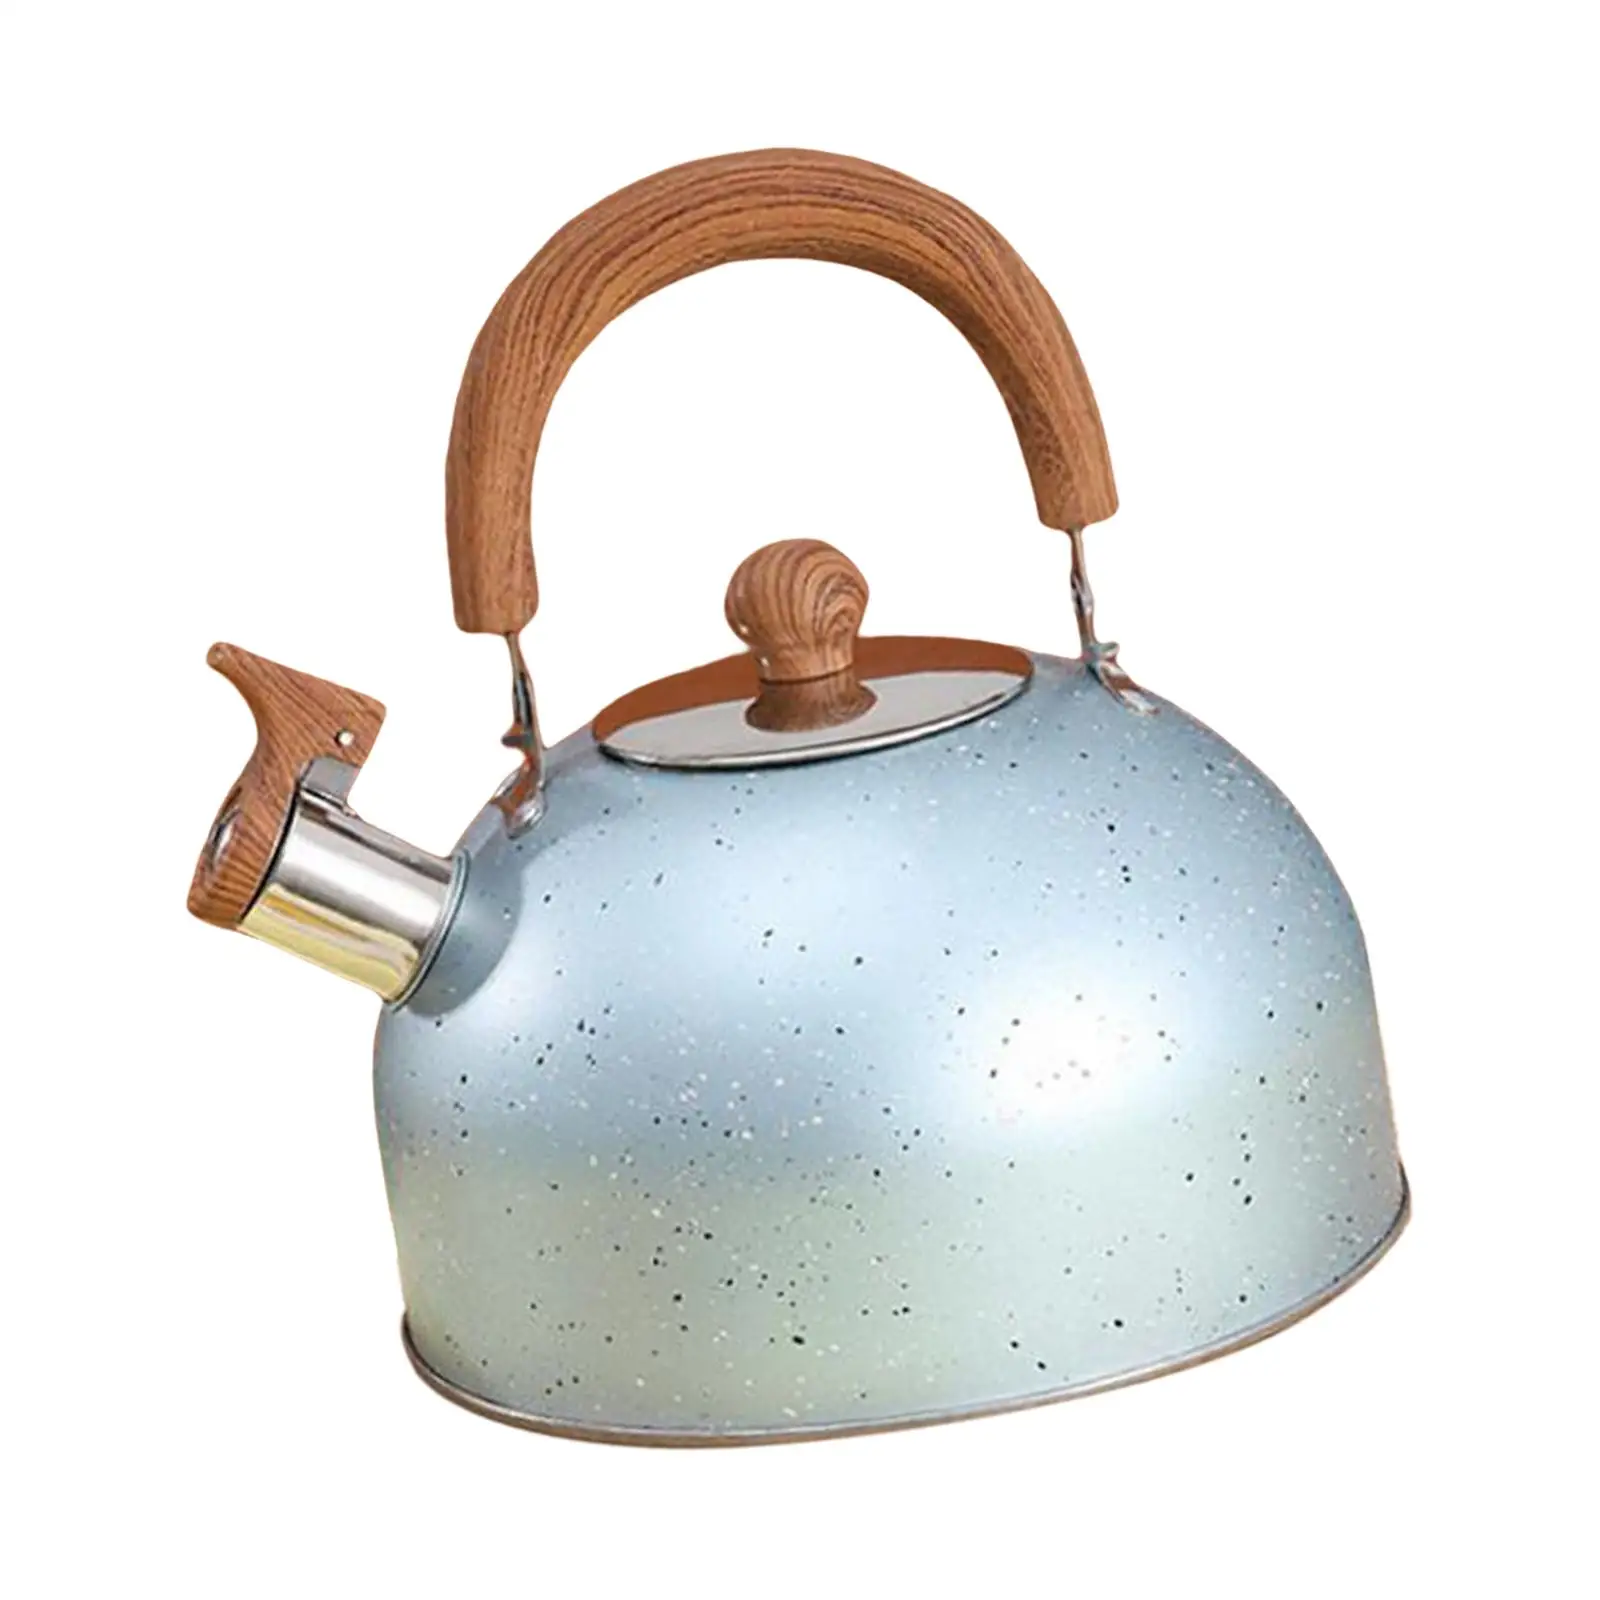 Tea Kettle Stovetop Whistling Whistle Water Kettle Fast Boiling Stainless Steel Tea Pots for Boiling water Milk Camping